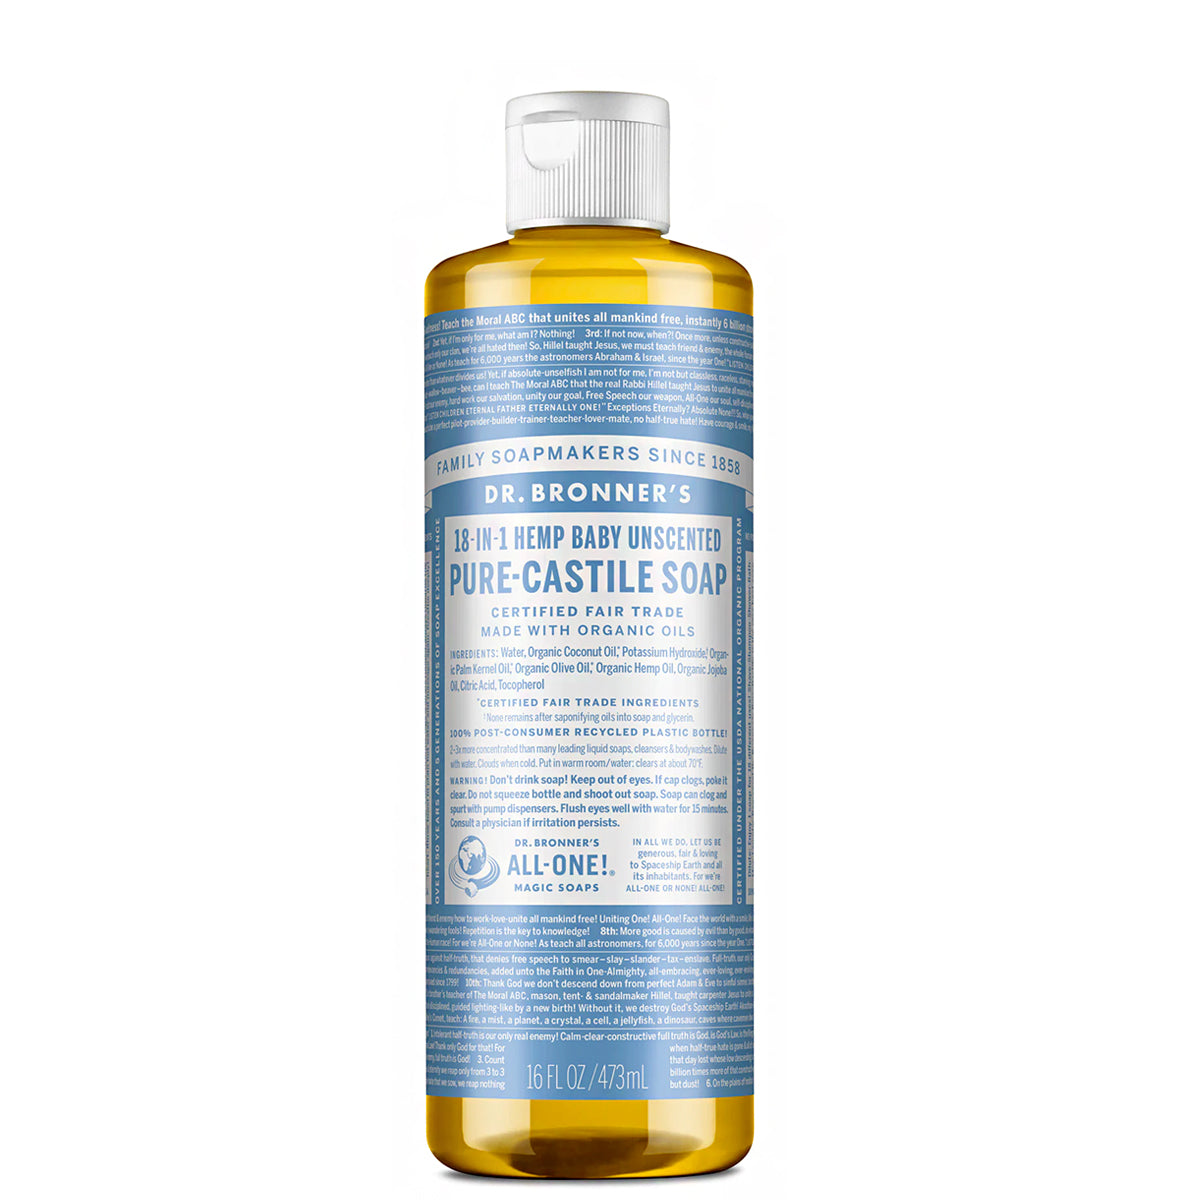 Dr. Bronner's 18-In-1 Hemp Baby Unscented Pure-Castile Soap 16oz